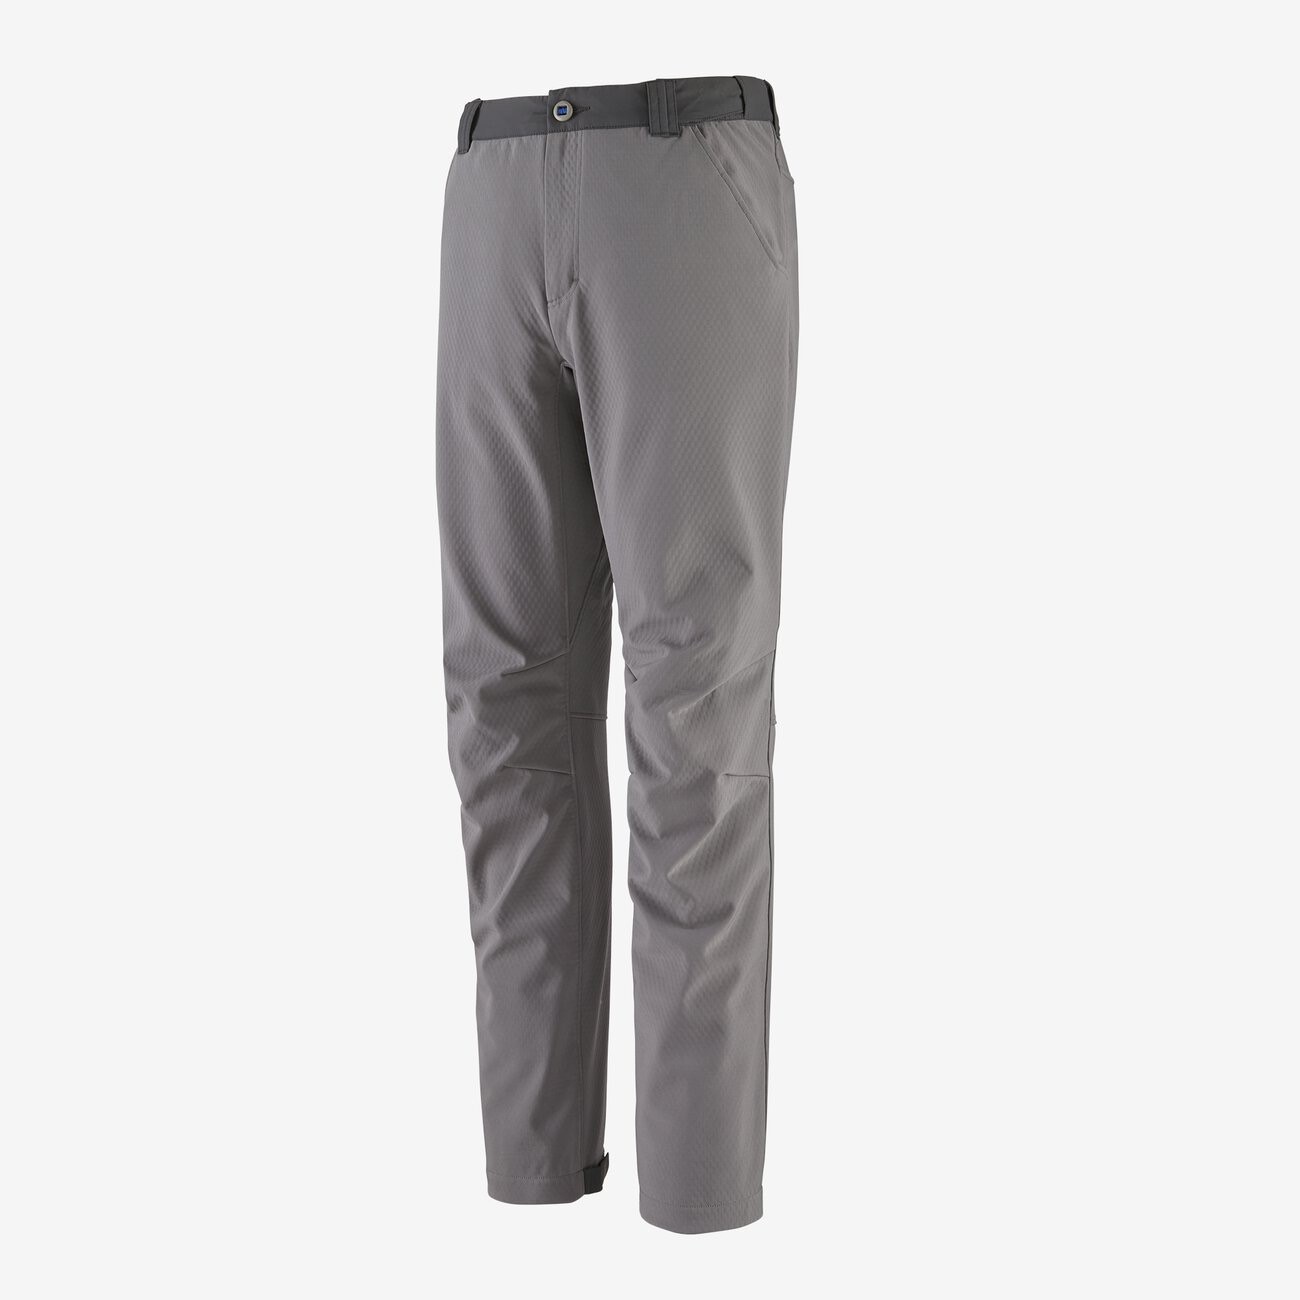 Patagonia M's Shelled Insulator Pants - Noble Grey - Large